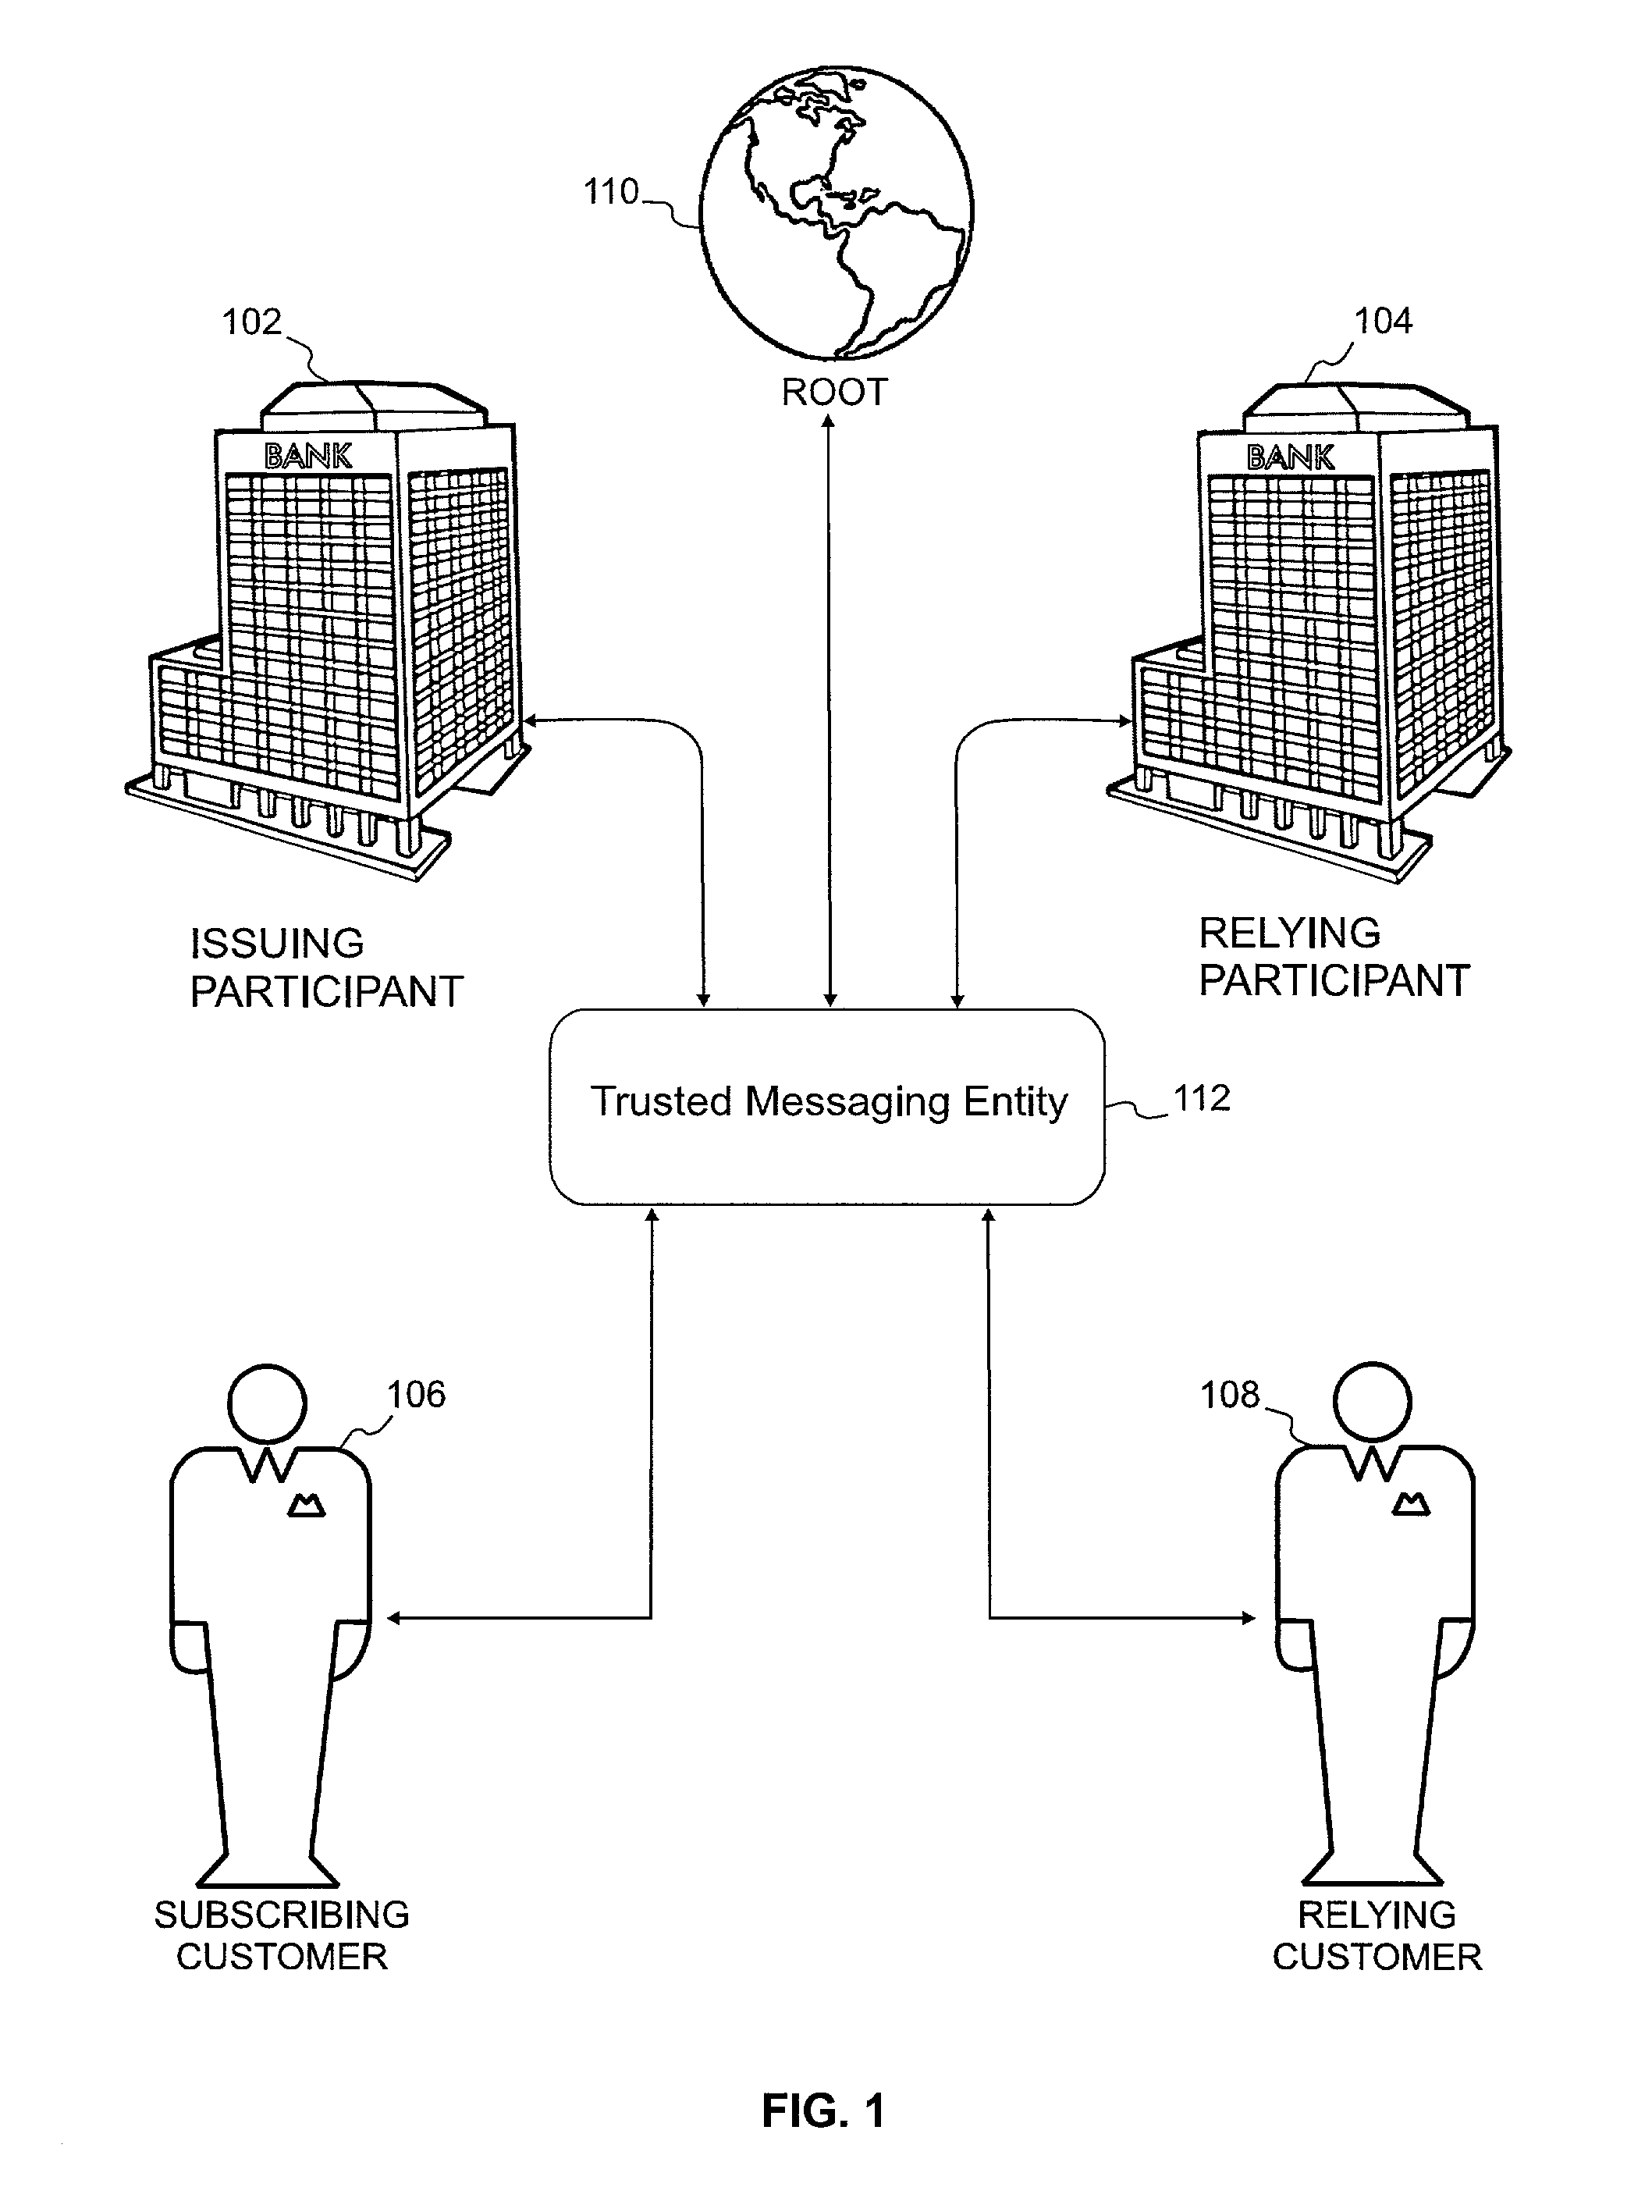 System and method for transparently providing certificate validation and other services within an electronic transaction